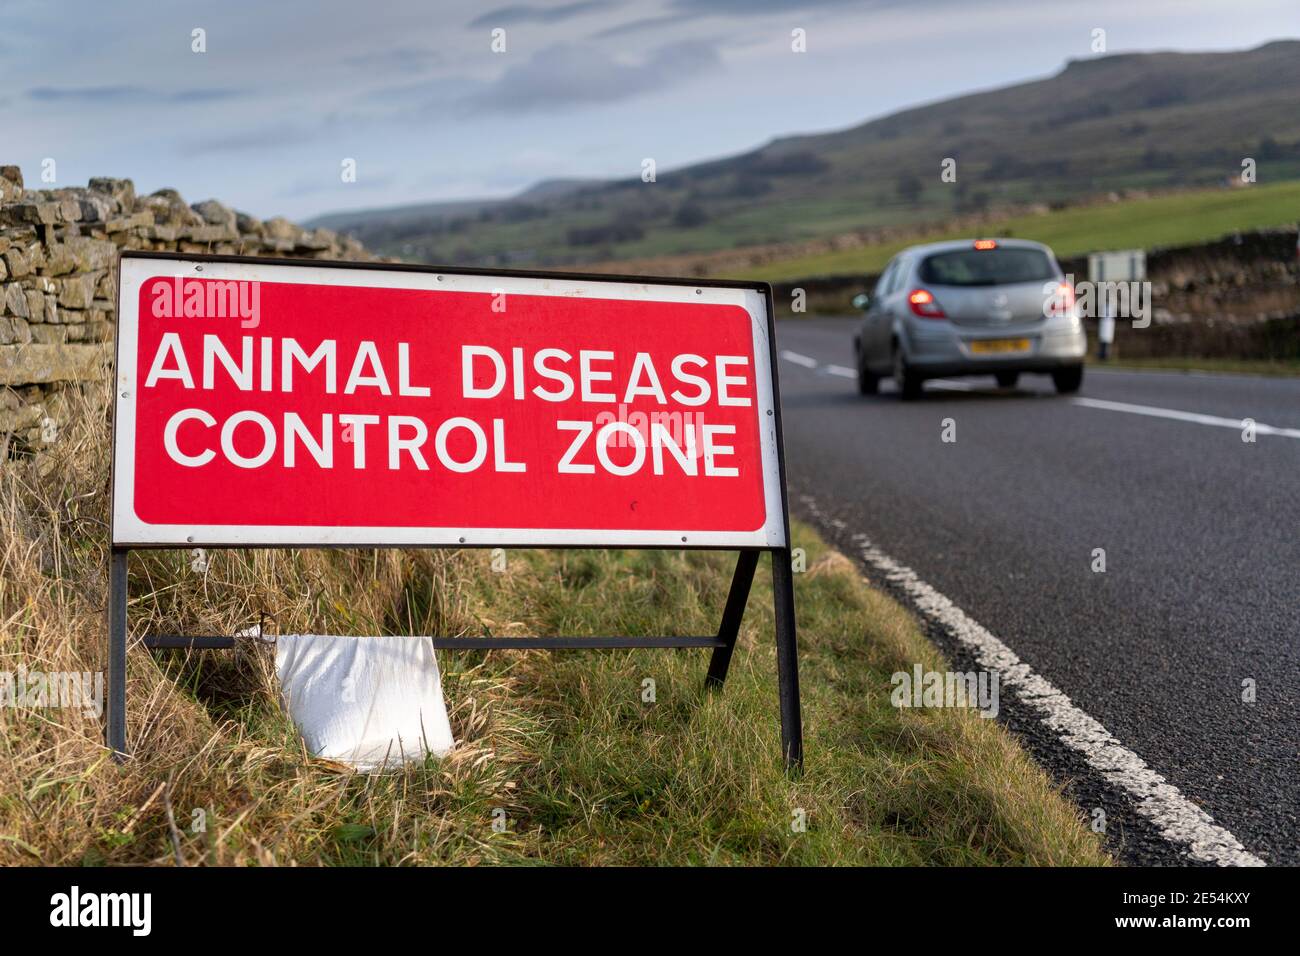 Animal Disease Control Area sign in Wensleydale, part of the Avian Flu outbreak late 2020, UK. Stock Photo